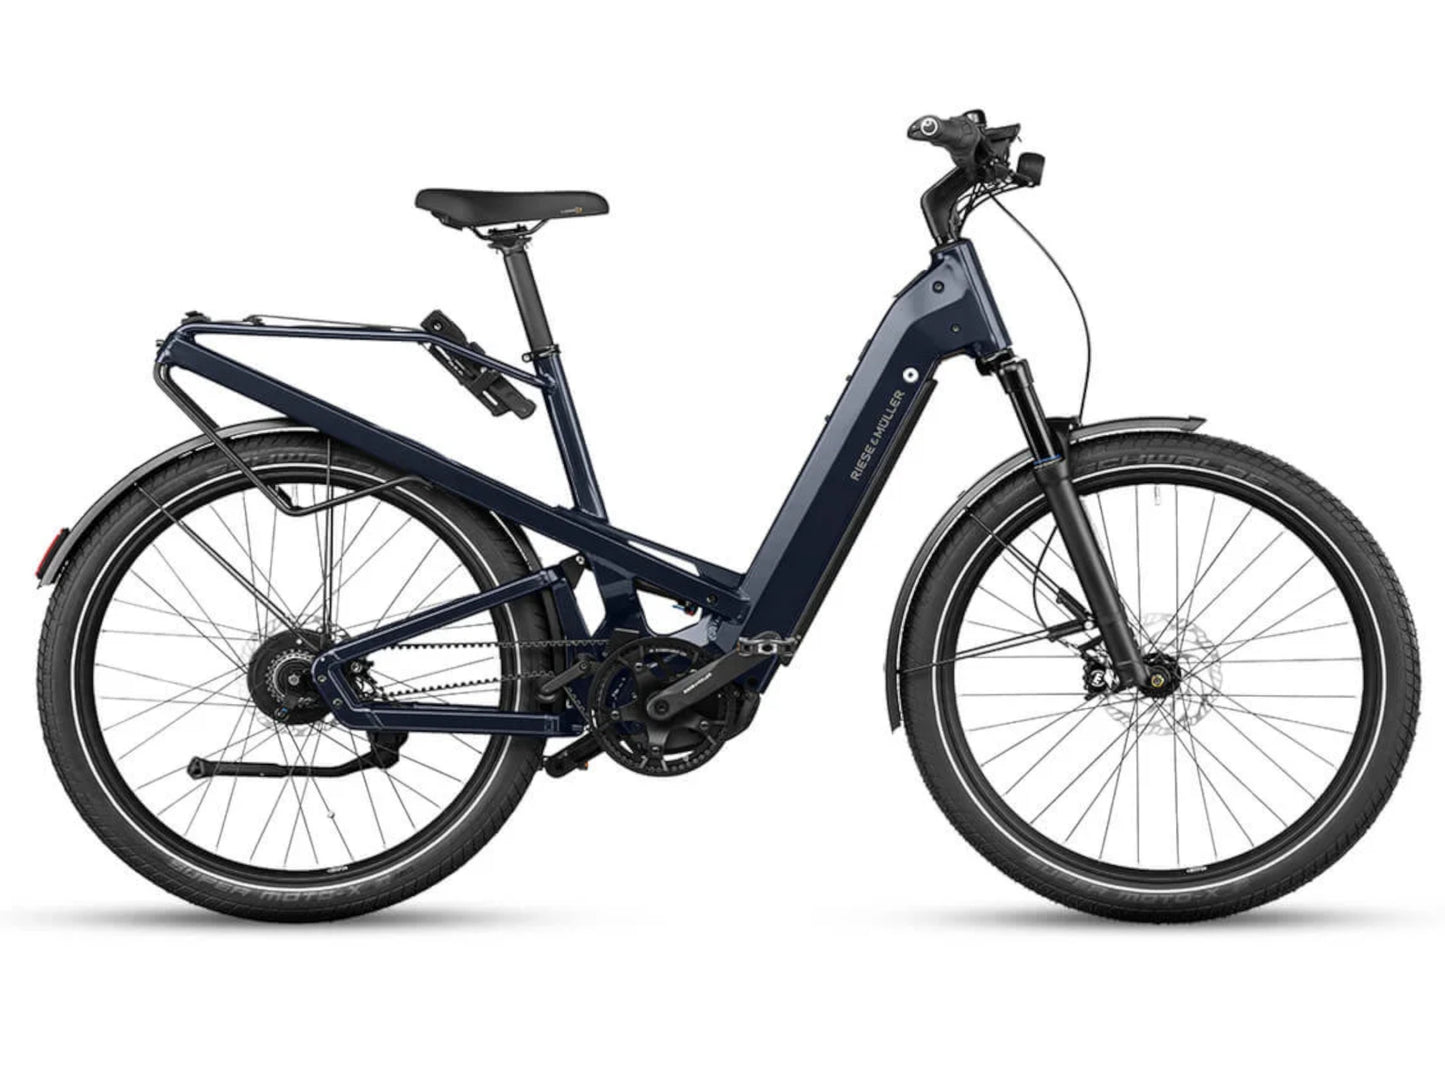 Riese and Muller Homage GT Vario eMTB full suspension deep sea blue profile on Fly Rides